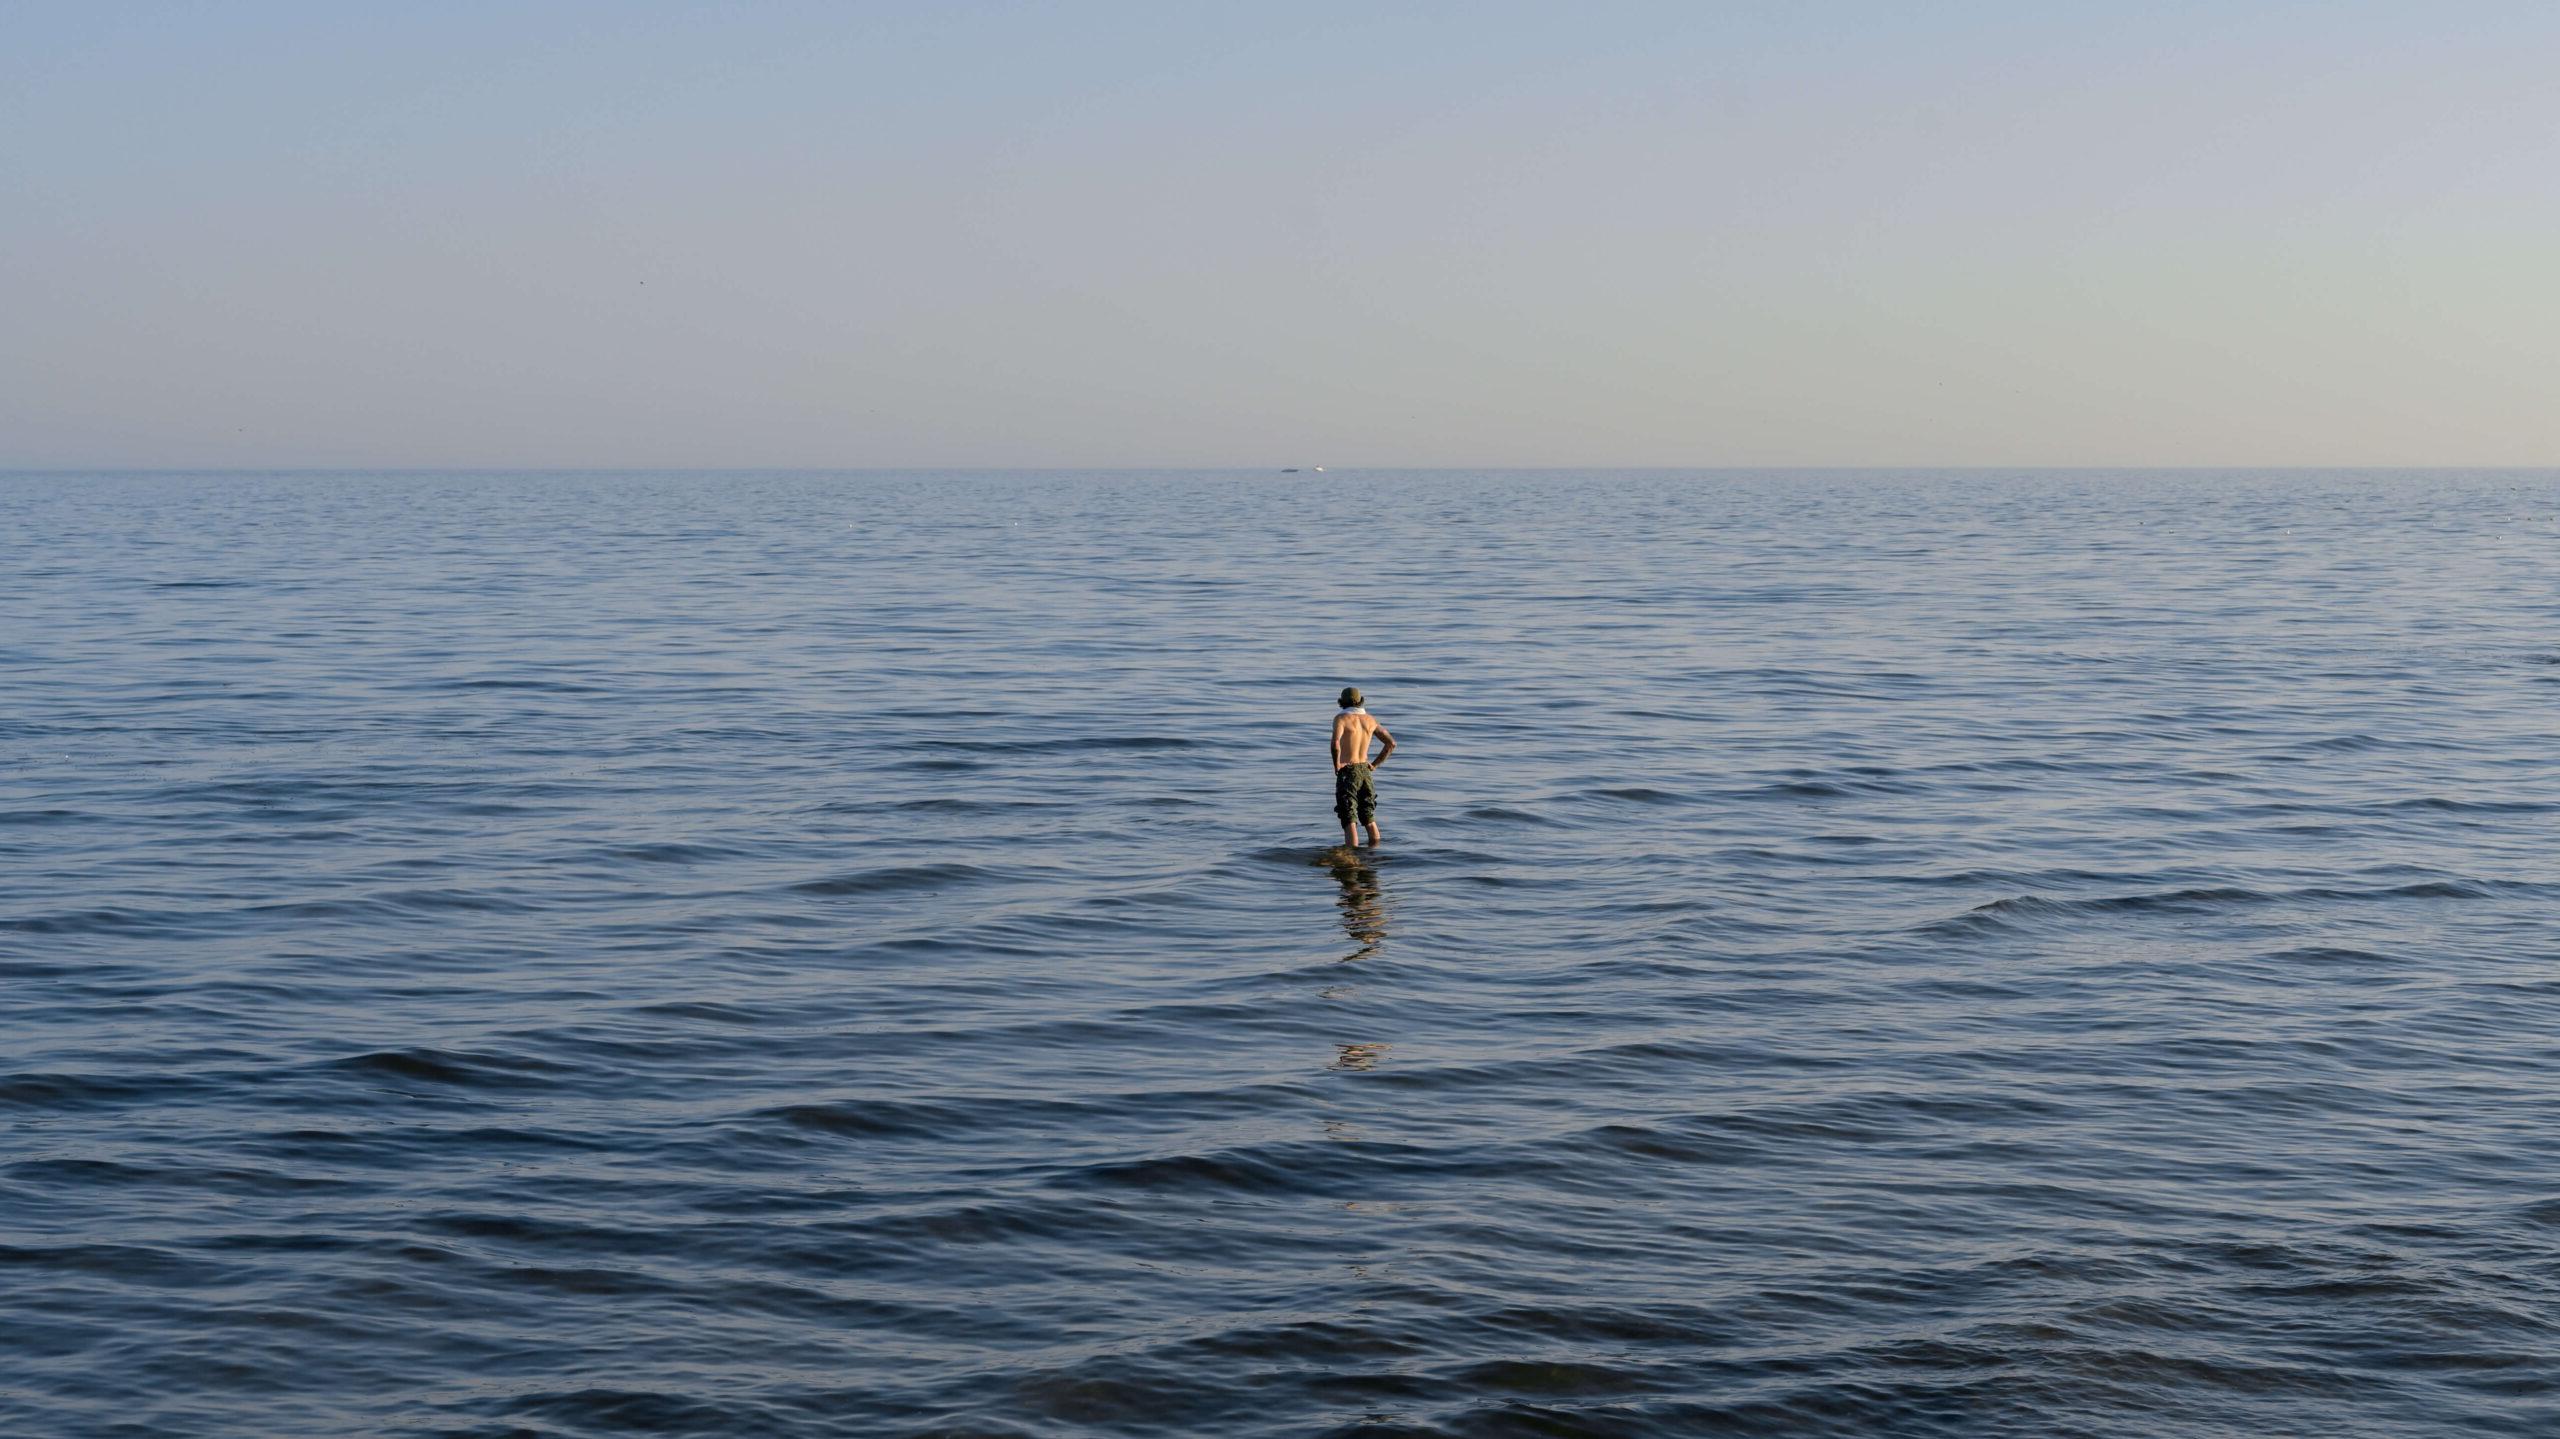 A person stands in the expansive, calm sea under a clear sky, with water stretching to the horizon. Their reflection is visible on the water's surface, creating a tranquil and serene scene.